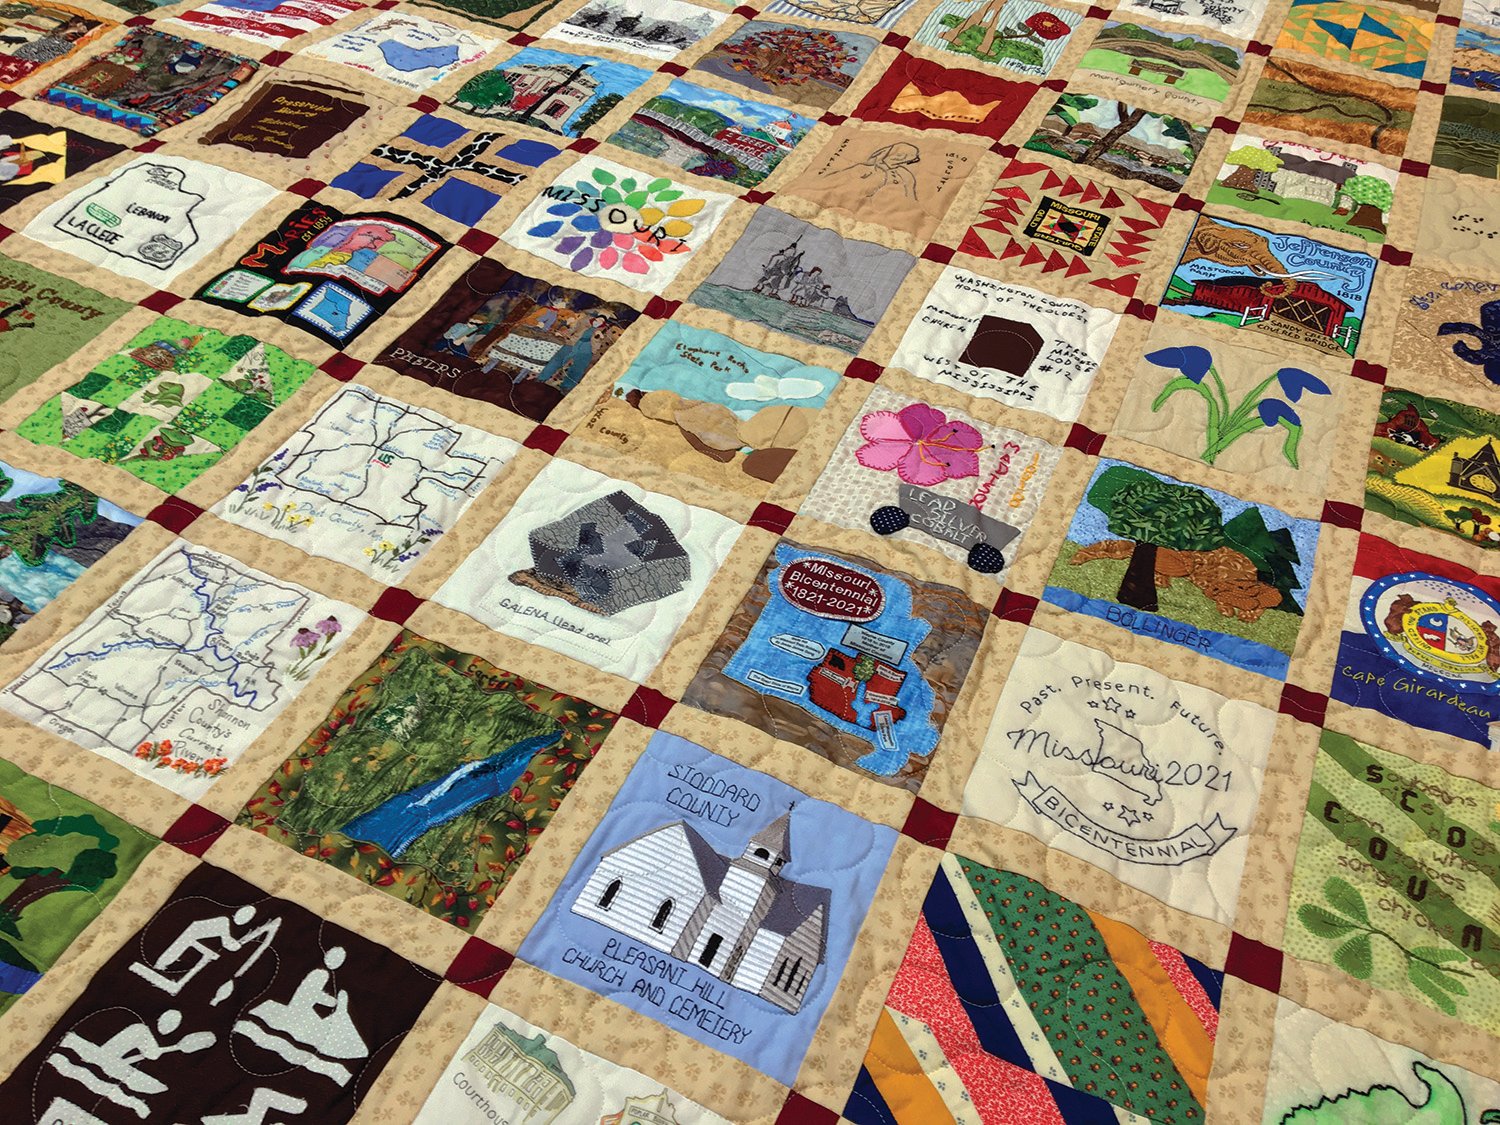 The Missouri Bicentennial quilt will be on display beginning next month through next year at the State Historical Society of Missouri’s six research centers.